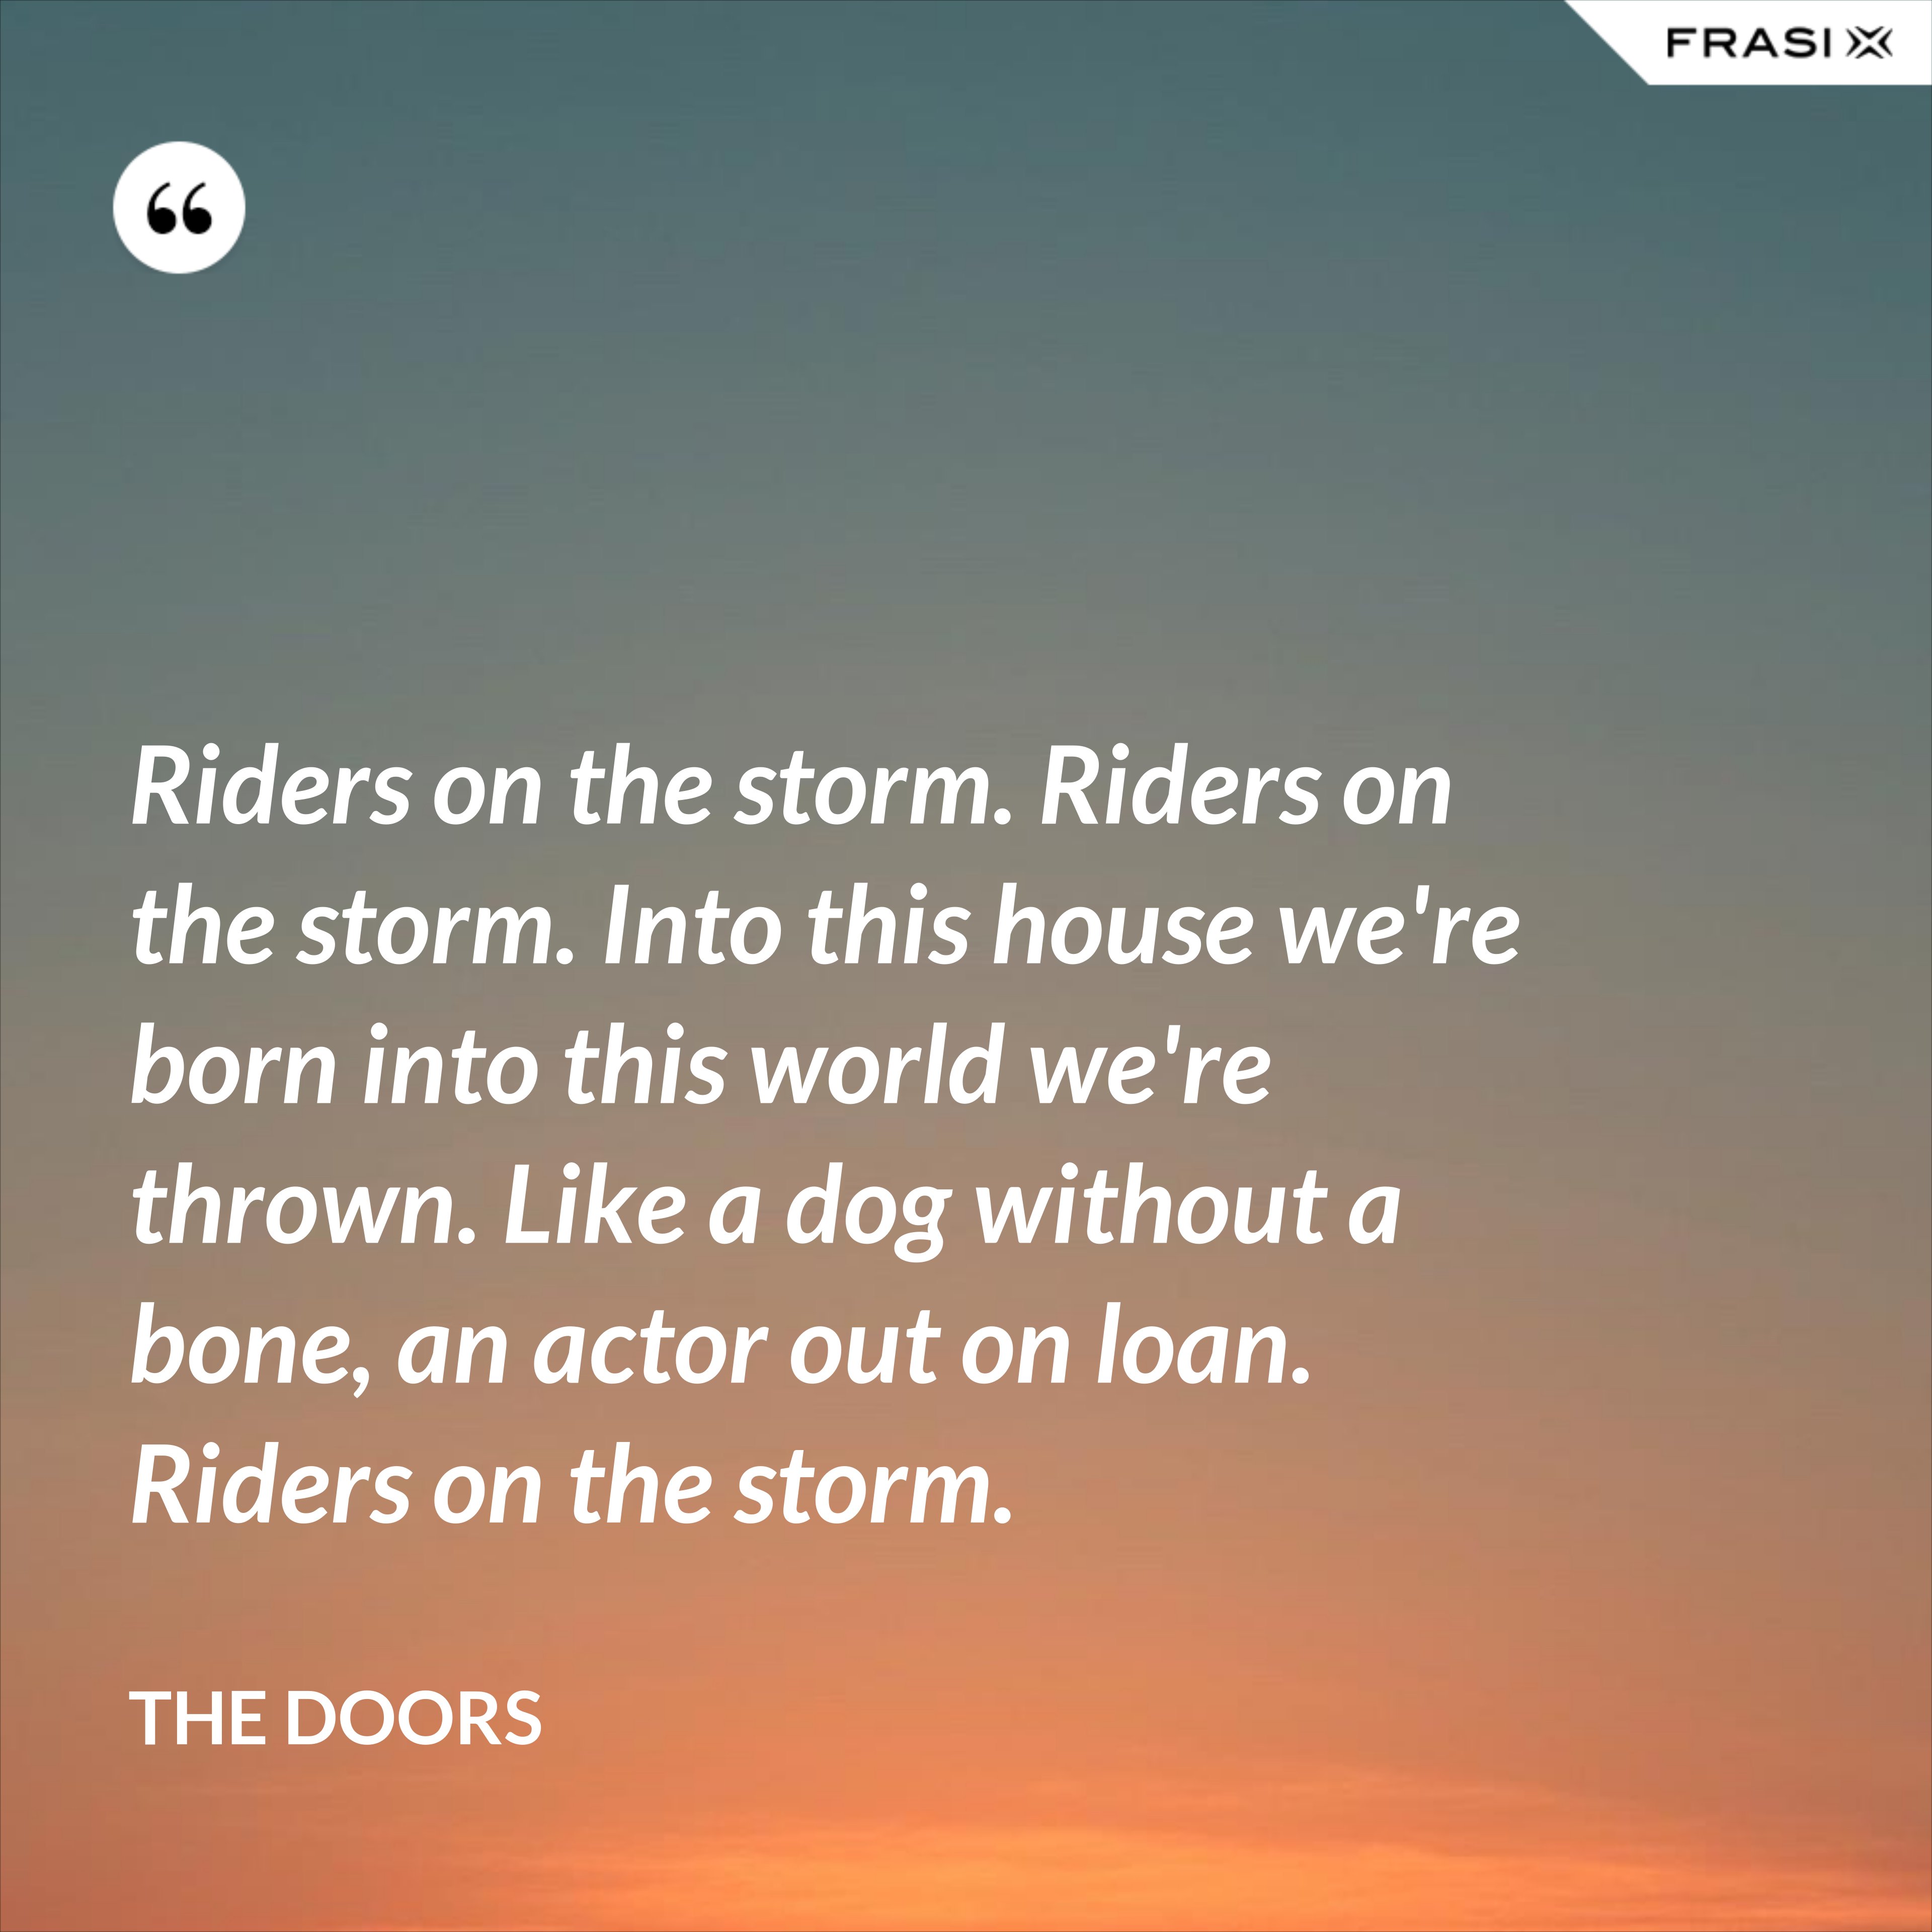 Riders on the storm. Riders on the storm. Into this house we're born into this world we're thrown. Like a dog without a bone, an actor out on loan. Riders on the storm. - The Doors